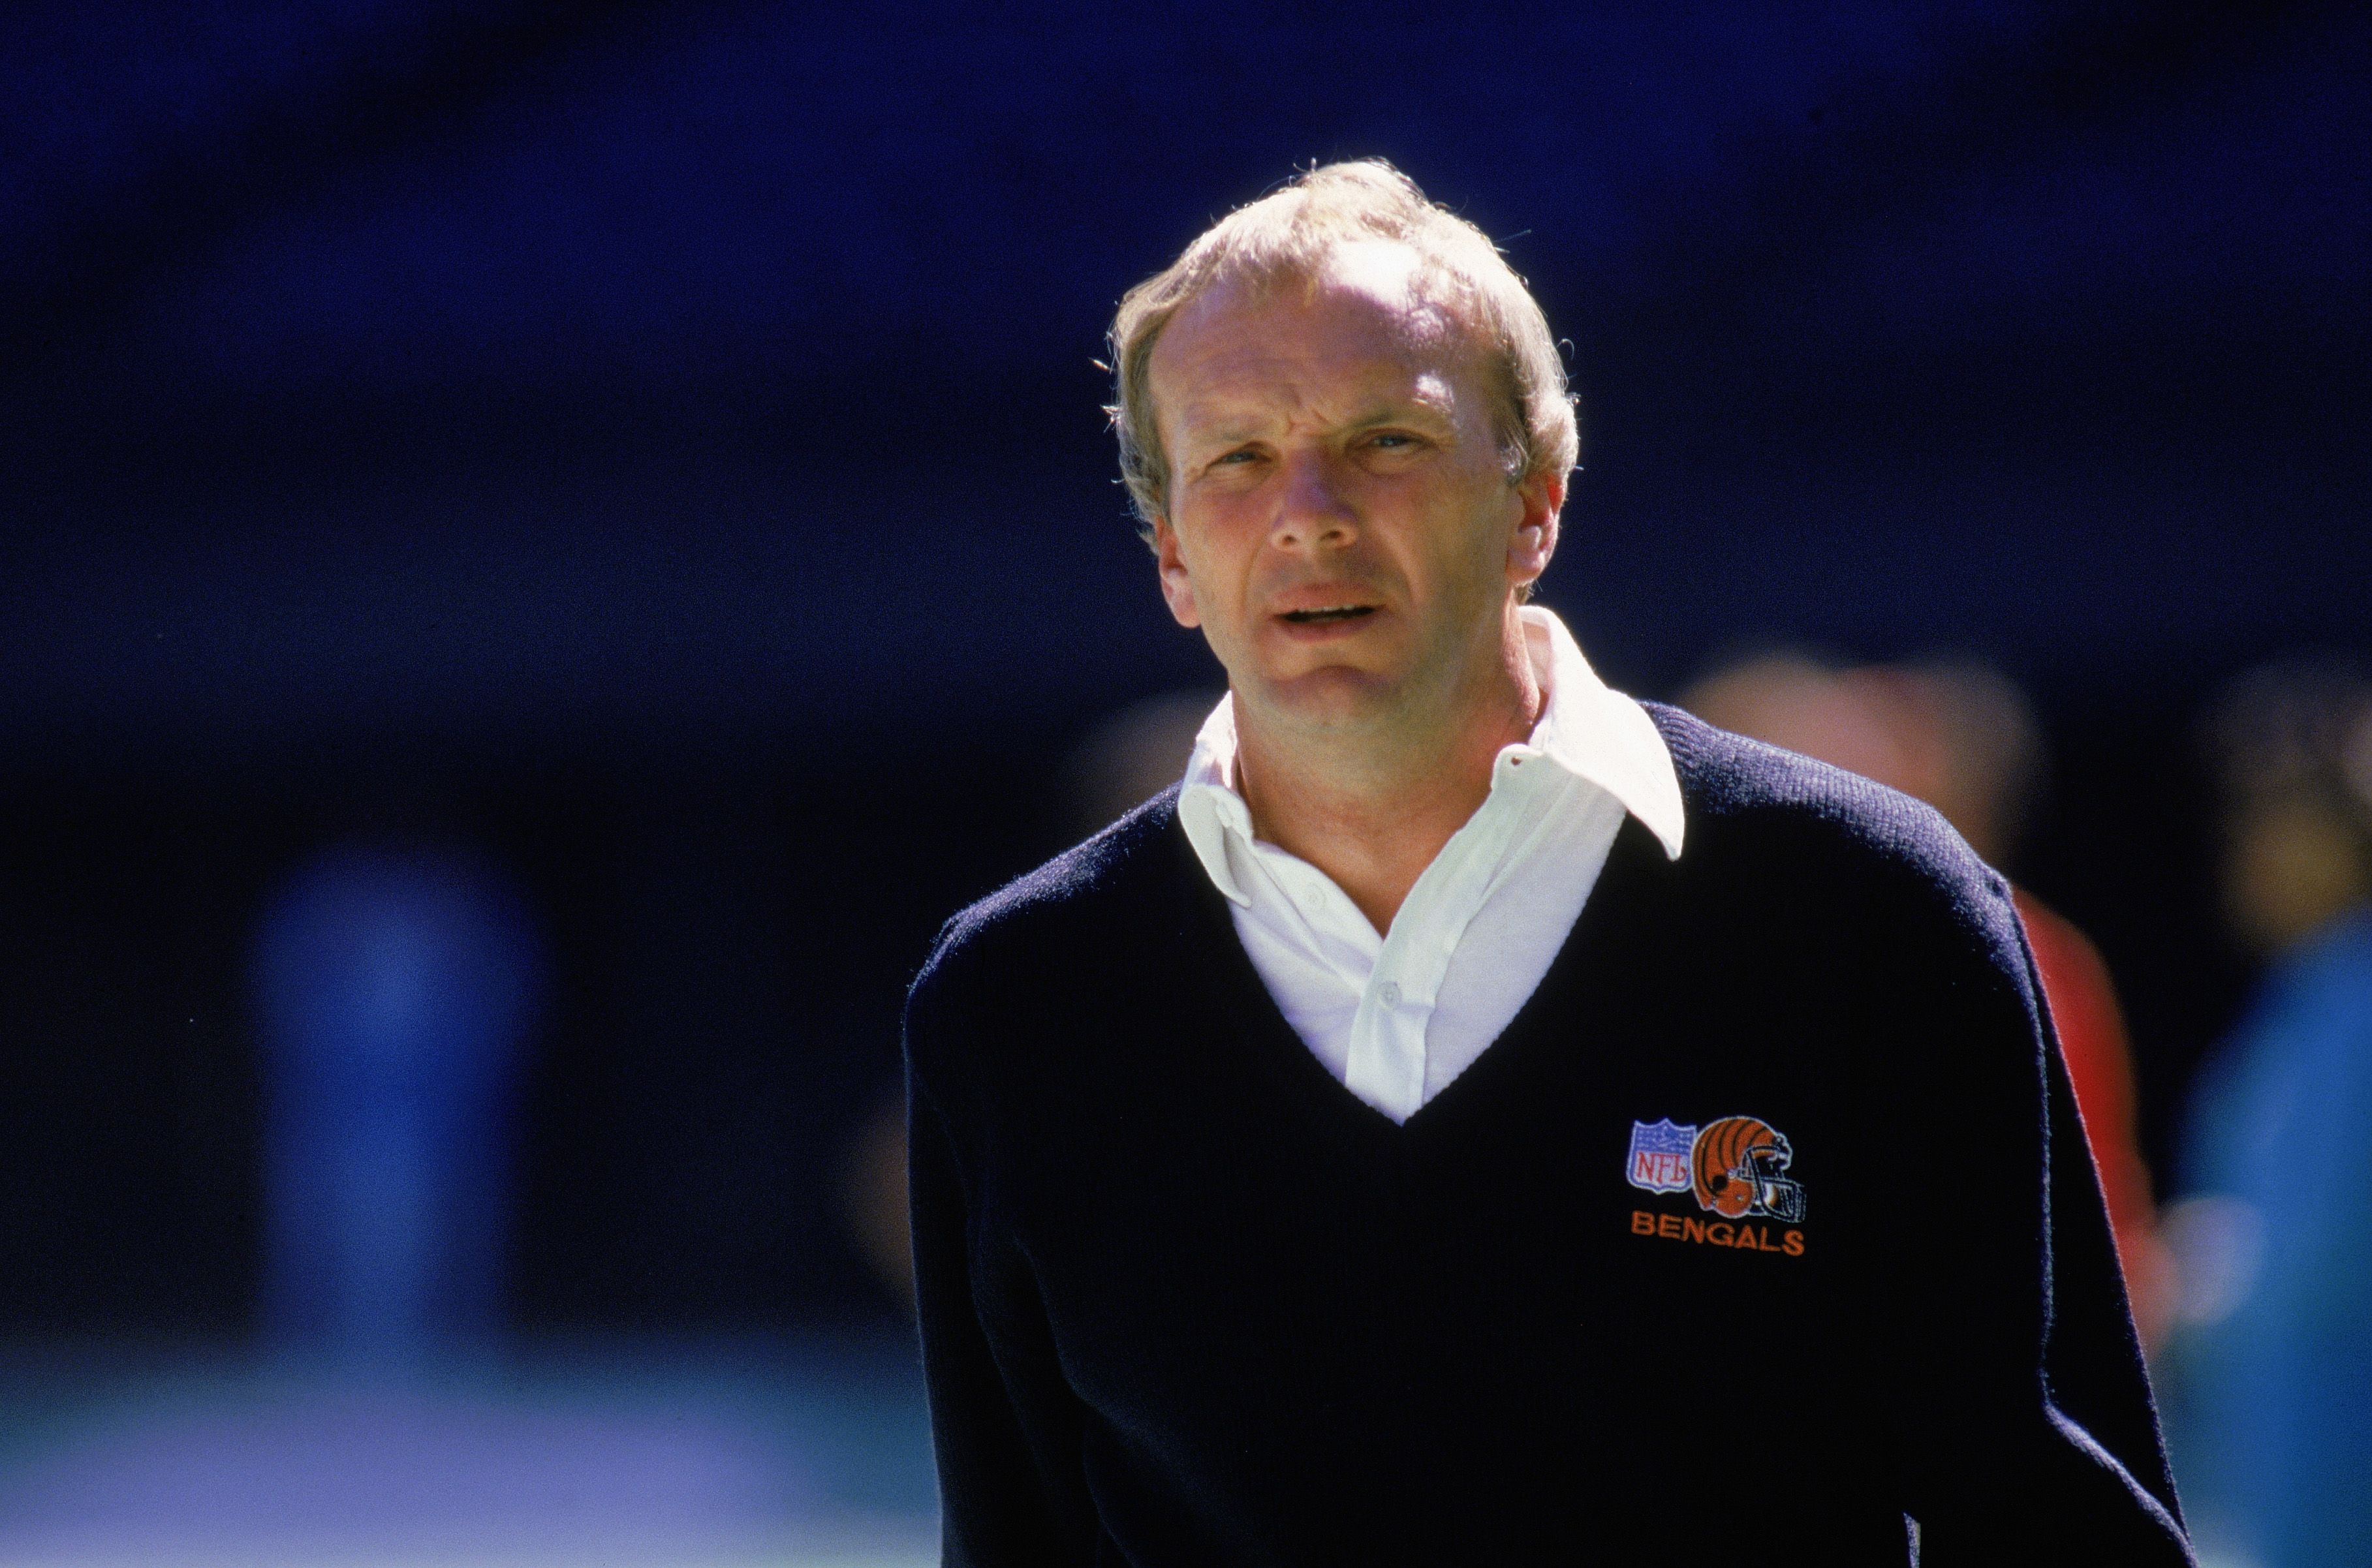 Sam Wyche, former Cincinnati Bengals coach who reminded fans they 'don't  live in Cleveland,' dies at 74 | CNN